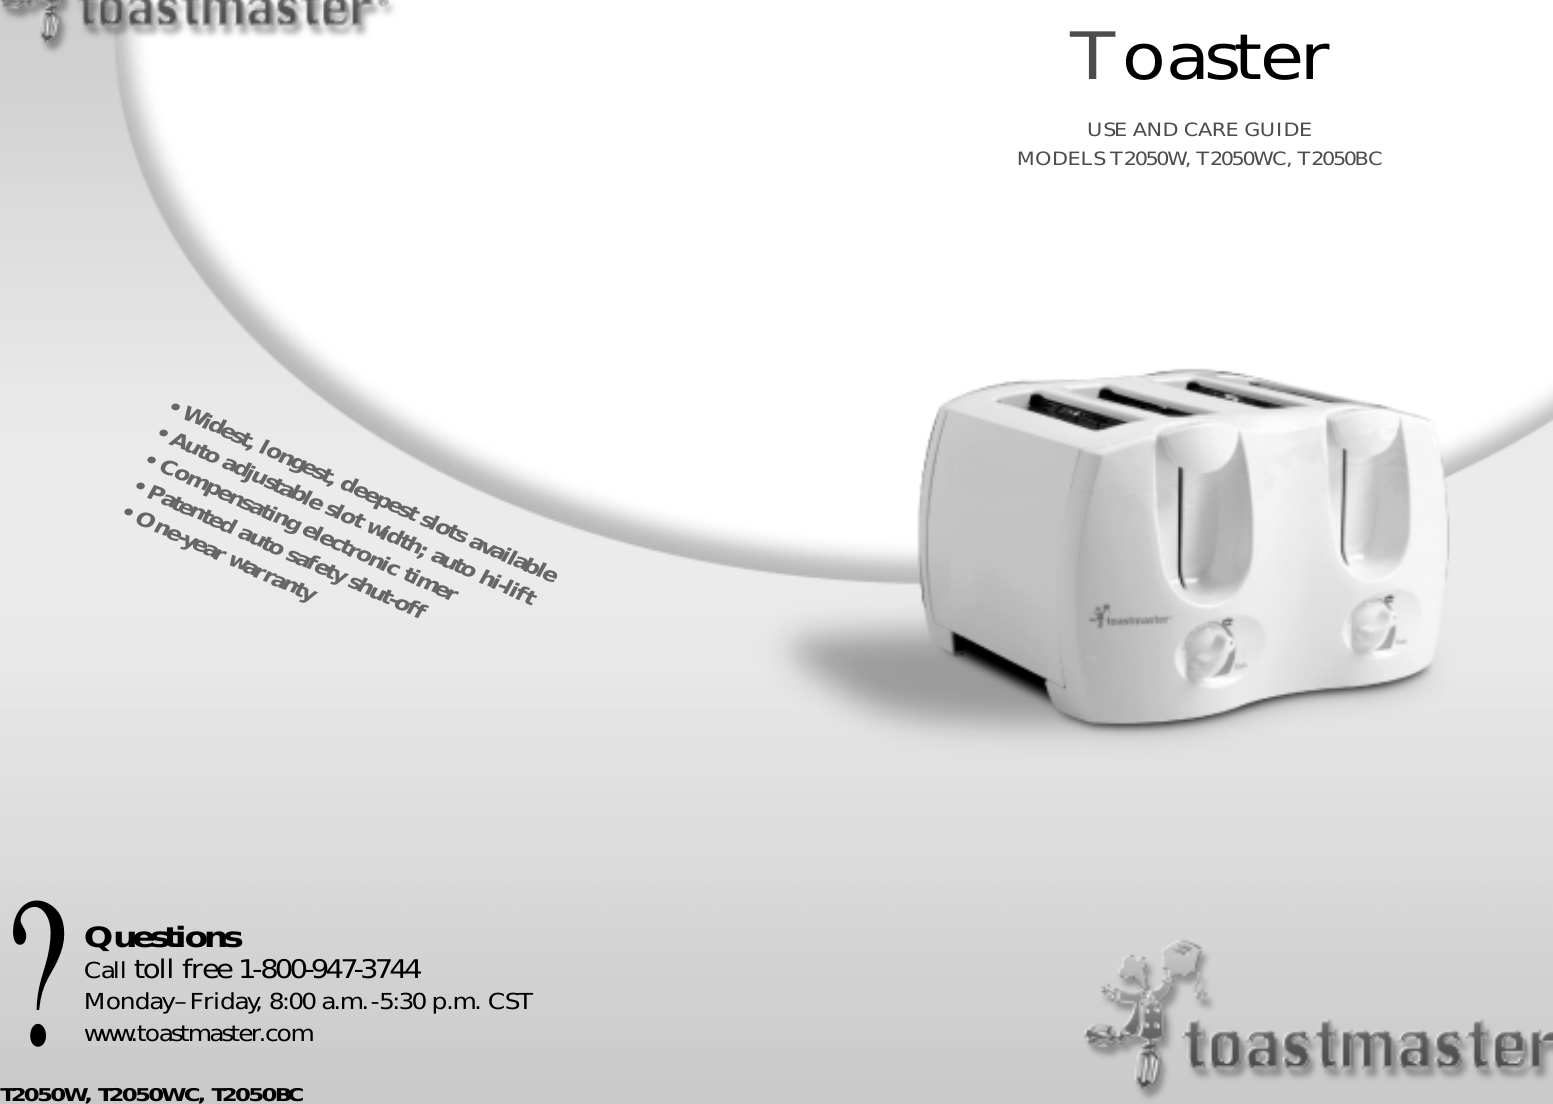 Toastmaster T2050Bc Users Manual